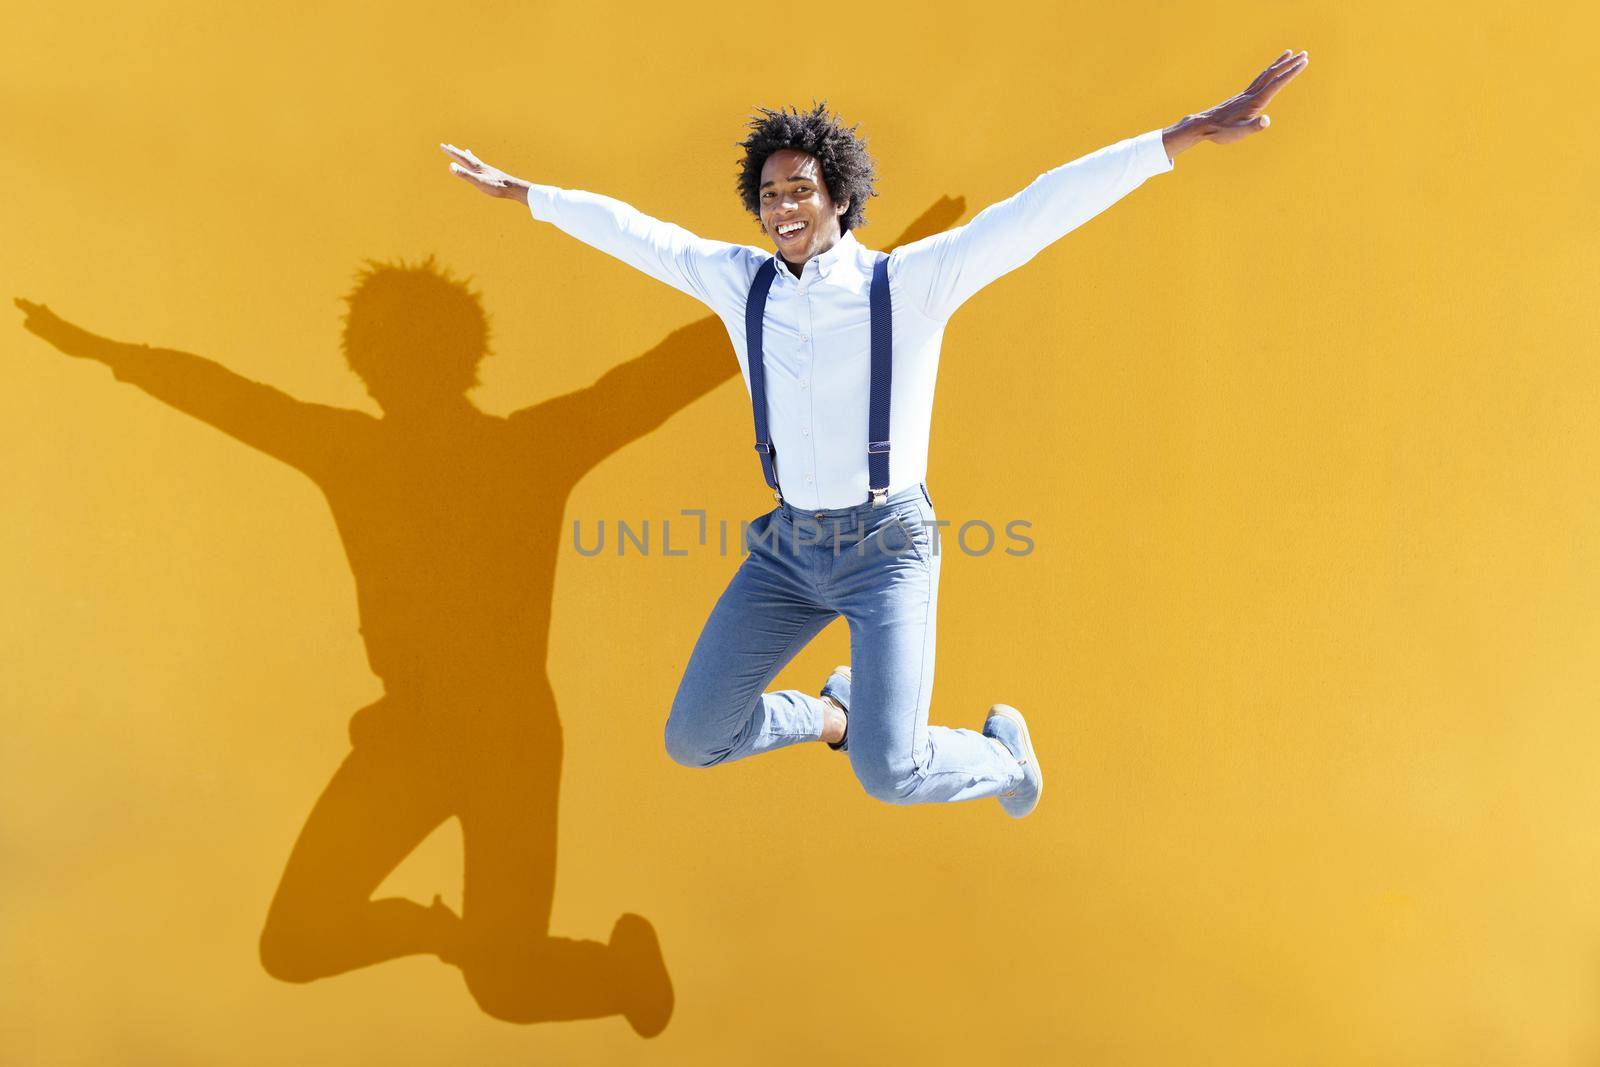 Black man with afro hair jumping on a yellow urban background. Guy wearing shirt and suspenders.